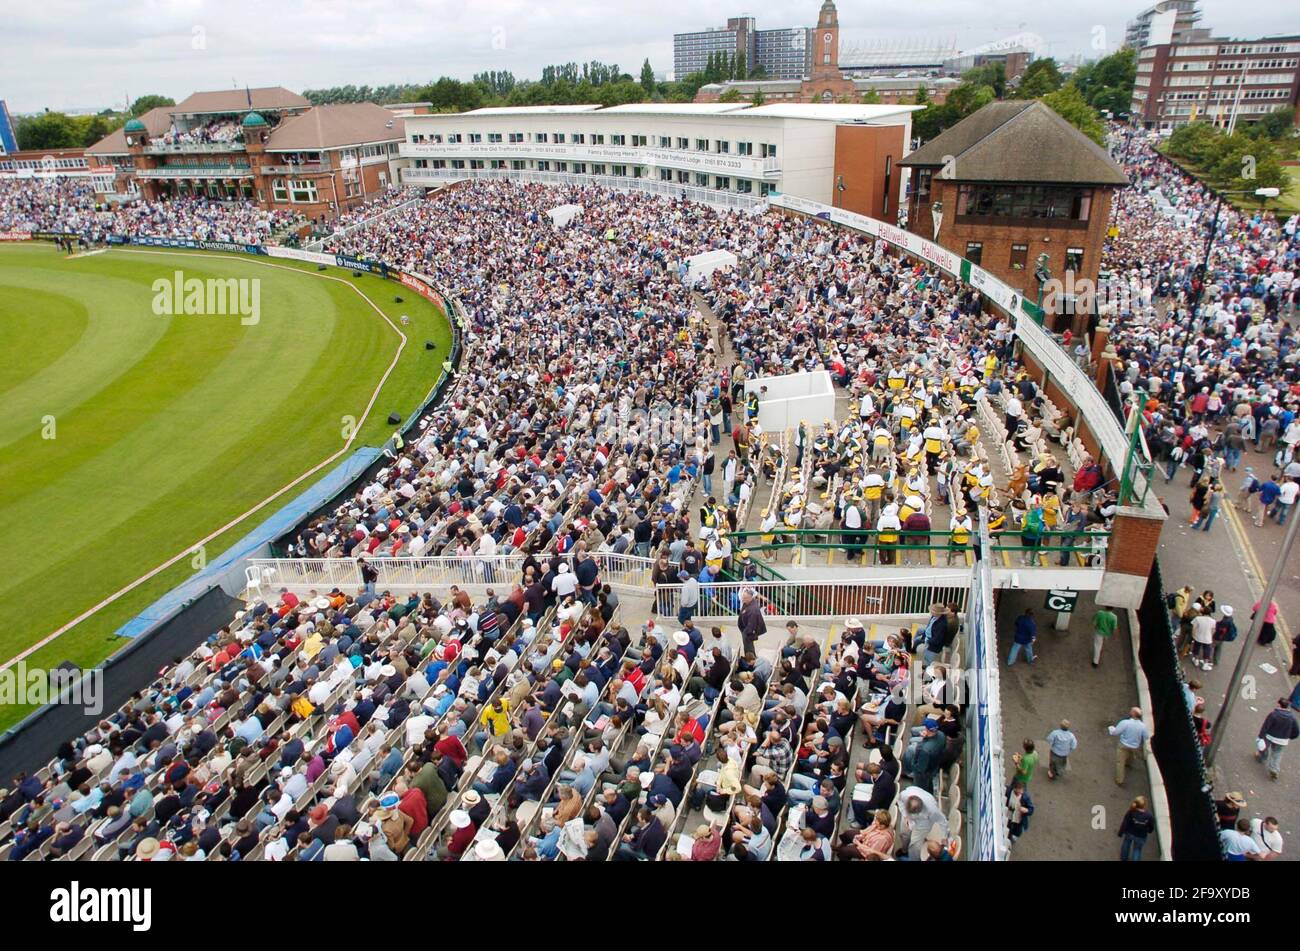 3rd TEST ENGLAND V AUSTRALIA  AT OLD TRAFFORD 5thDAY A FULL HOUSE AND PEOPLE LOCKED OUT 15/8/2005 PICTURE DAVID ASHDOWNTEST CRICKET Stock Photo